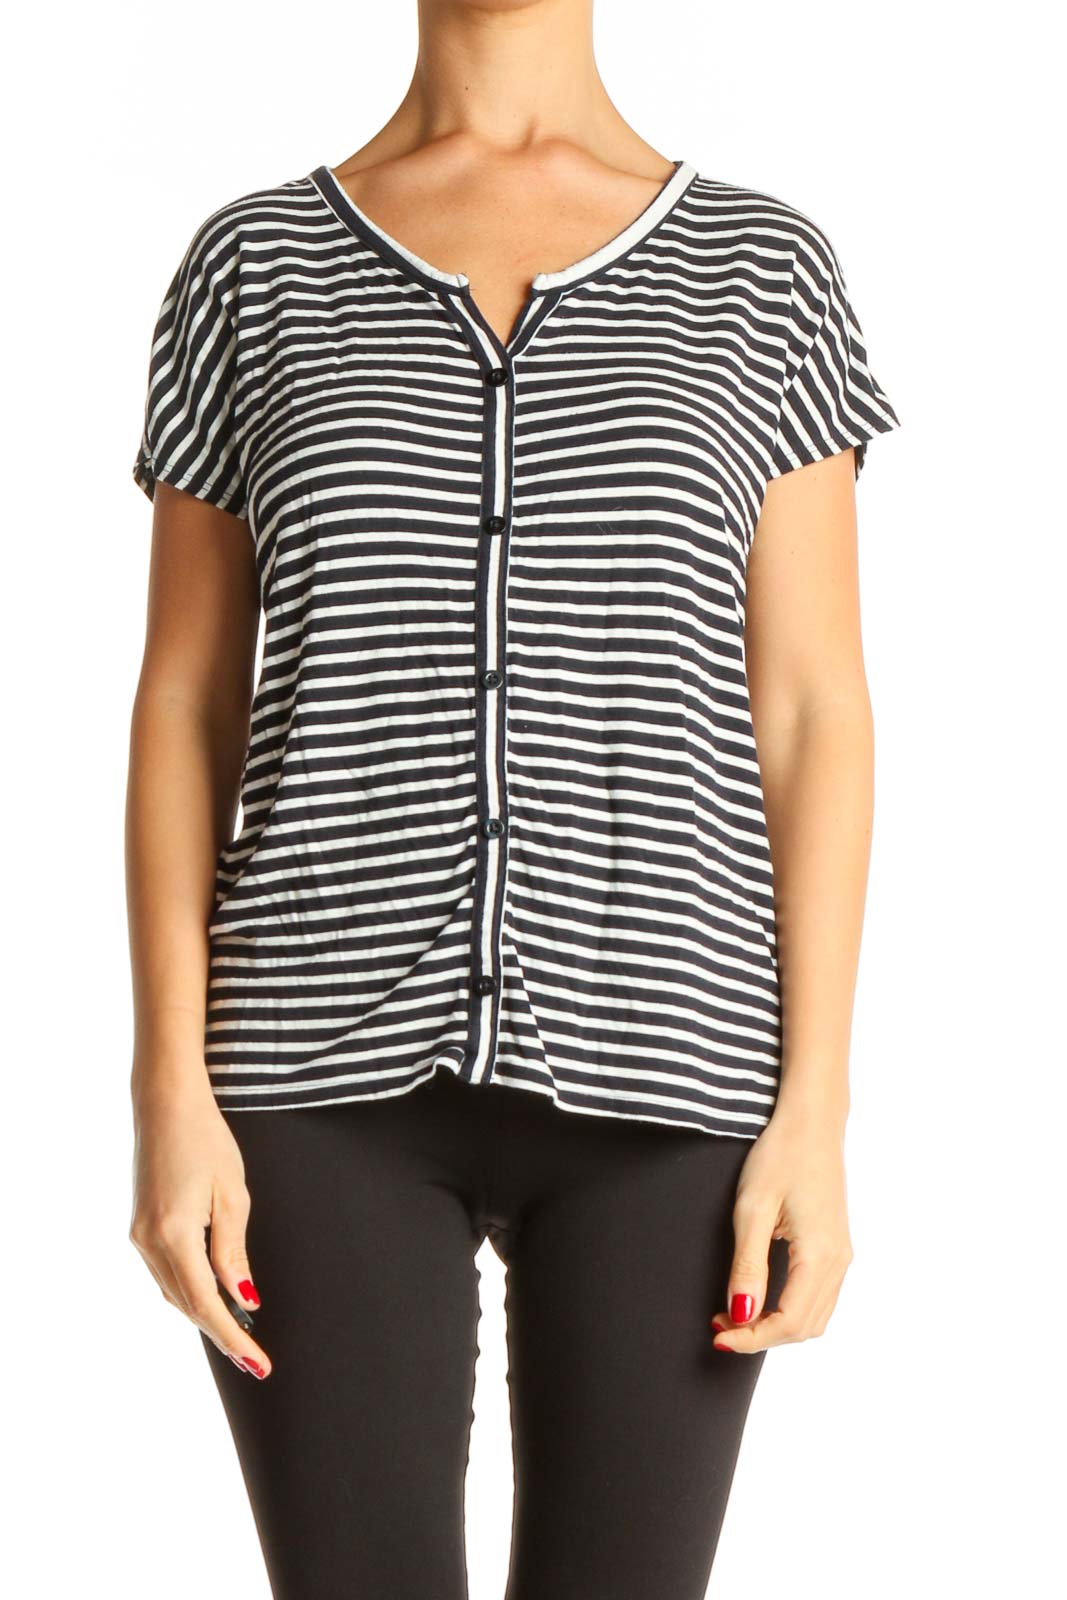 White Striped All Day Wear Top Front